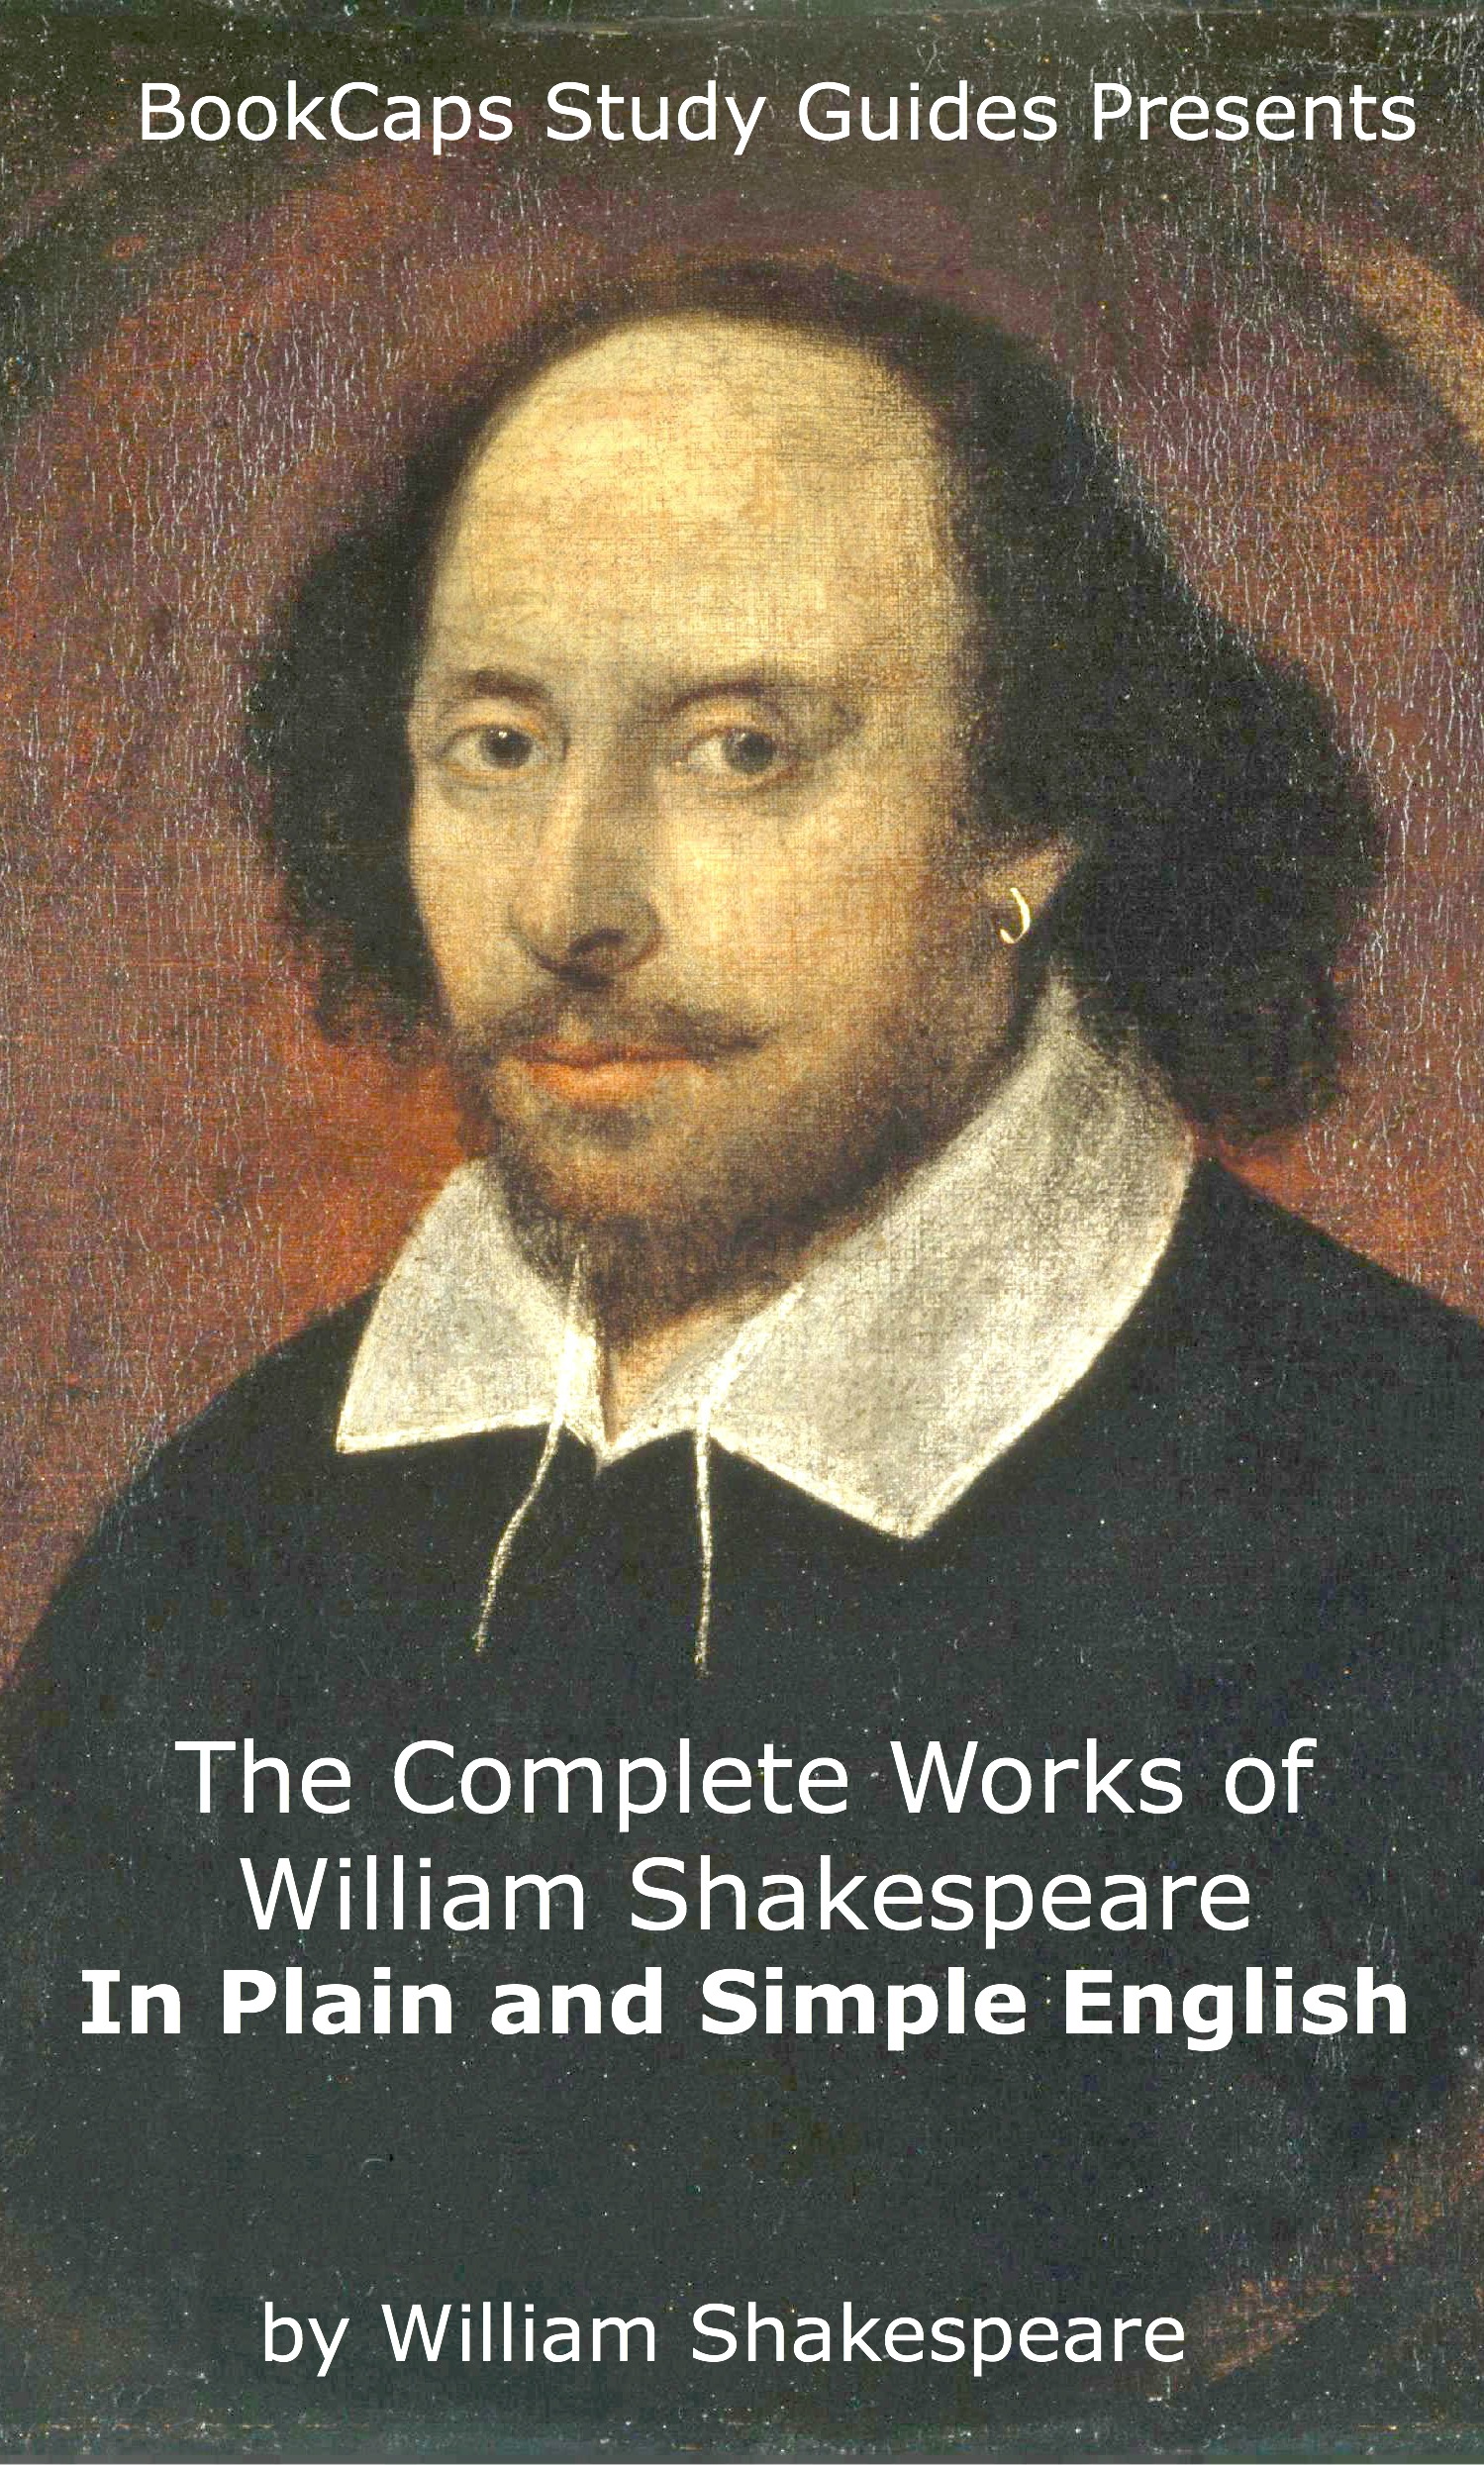 purchase-a-pdf-or-epub-of-the-complete-works-of-shakespeare-in-modern-english